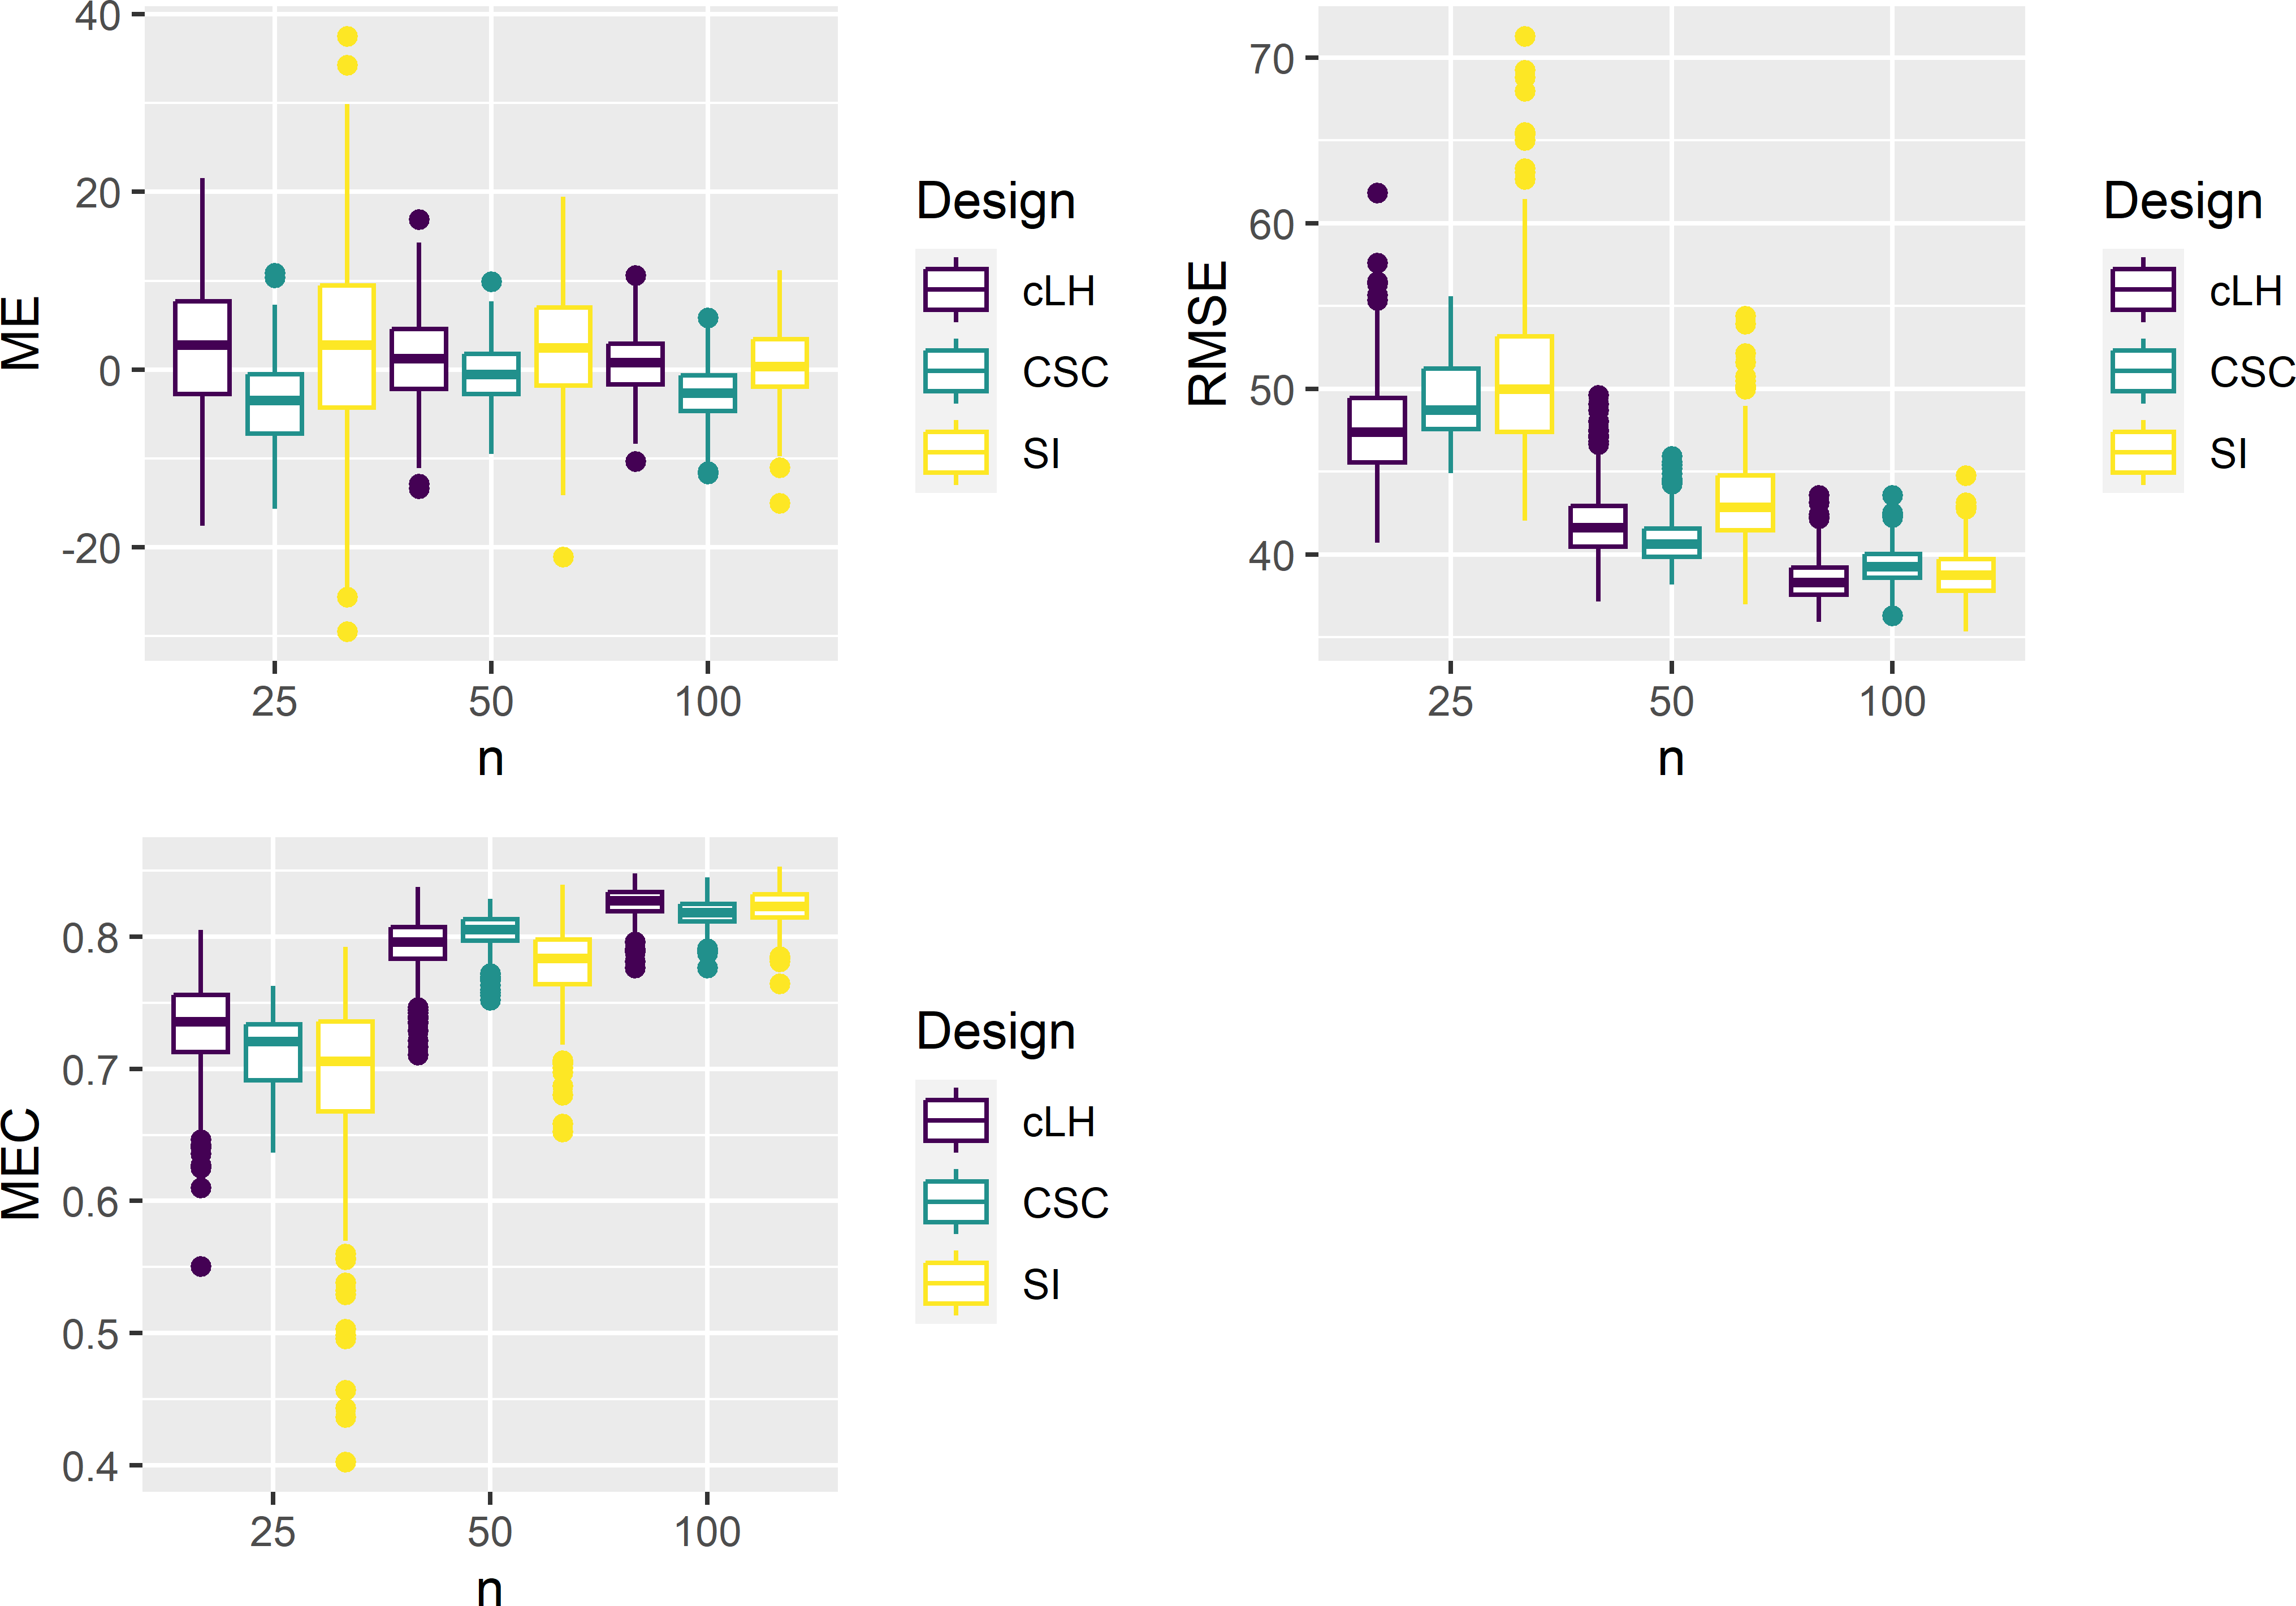 Boxplots of ME, RMSE, and MEC of predictions with RF models calibrated on conditioned Latin hypercube (cLH), covariate space coverage (CSC), and simple random (SI) samples from Eastern Amazonia, for sample sizes of 25, 50, and 100 units.